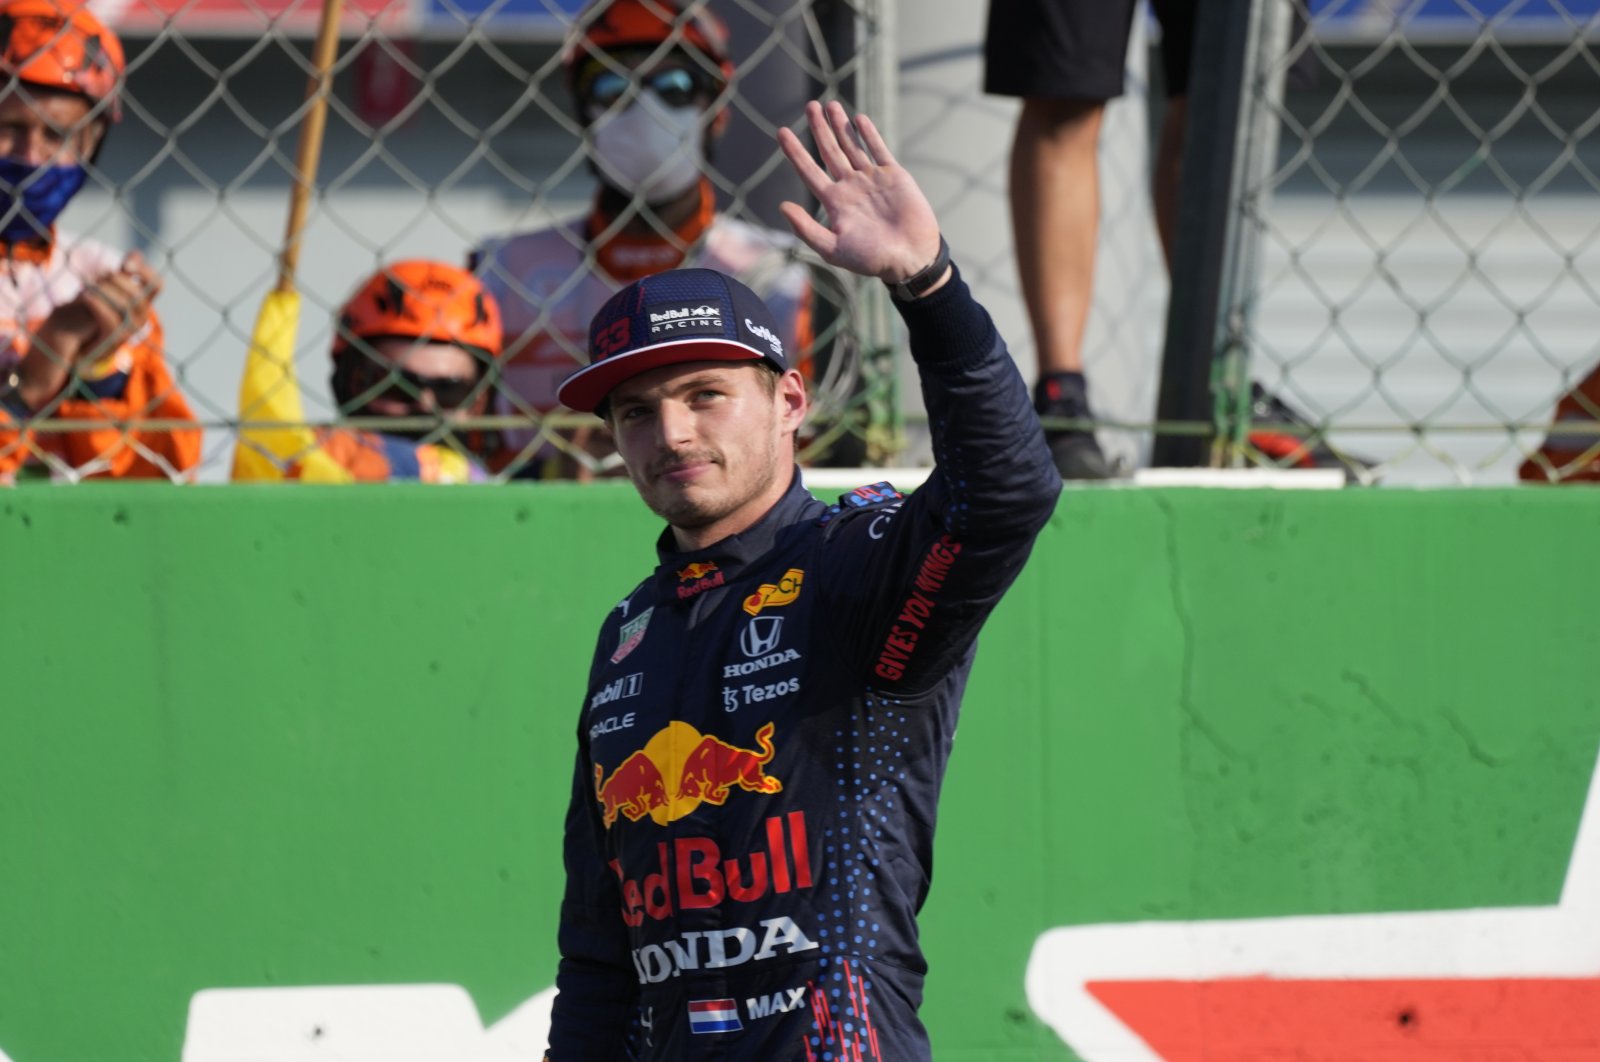 Red Bull driver Max Verstappen of the Netherlands waves to fans after the Sprint Race qualifying session at the Monza racetrack, in Monza, Italy, Sept.11, 2021. (AP Photo)